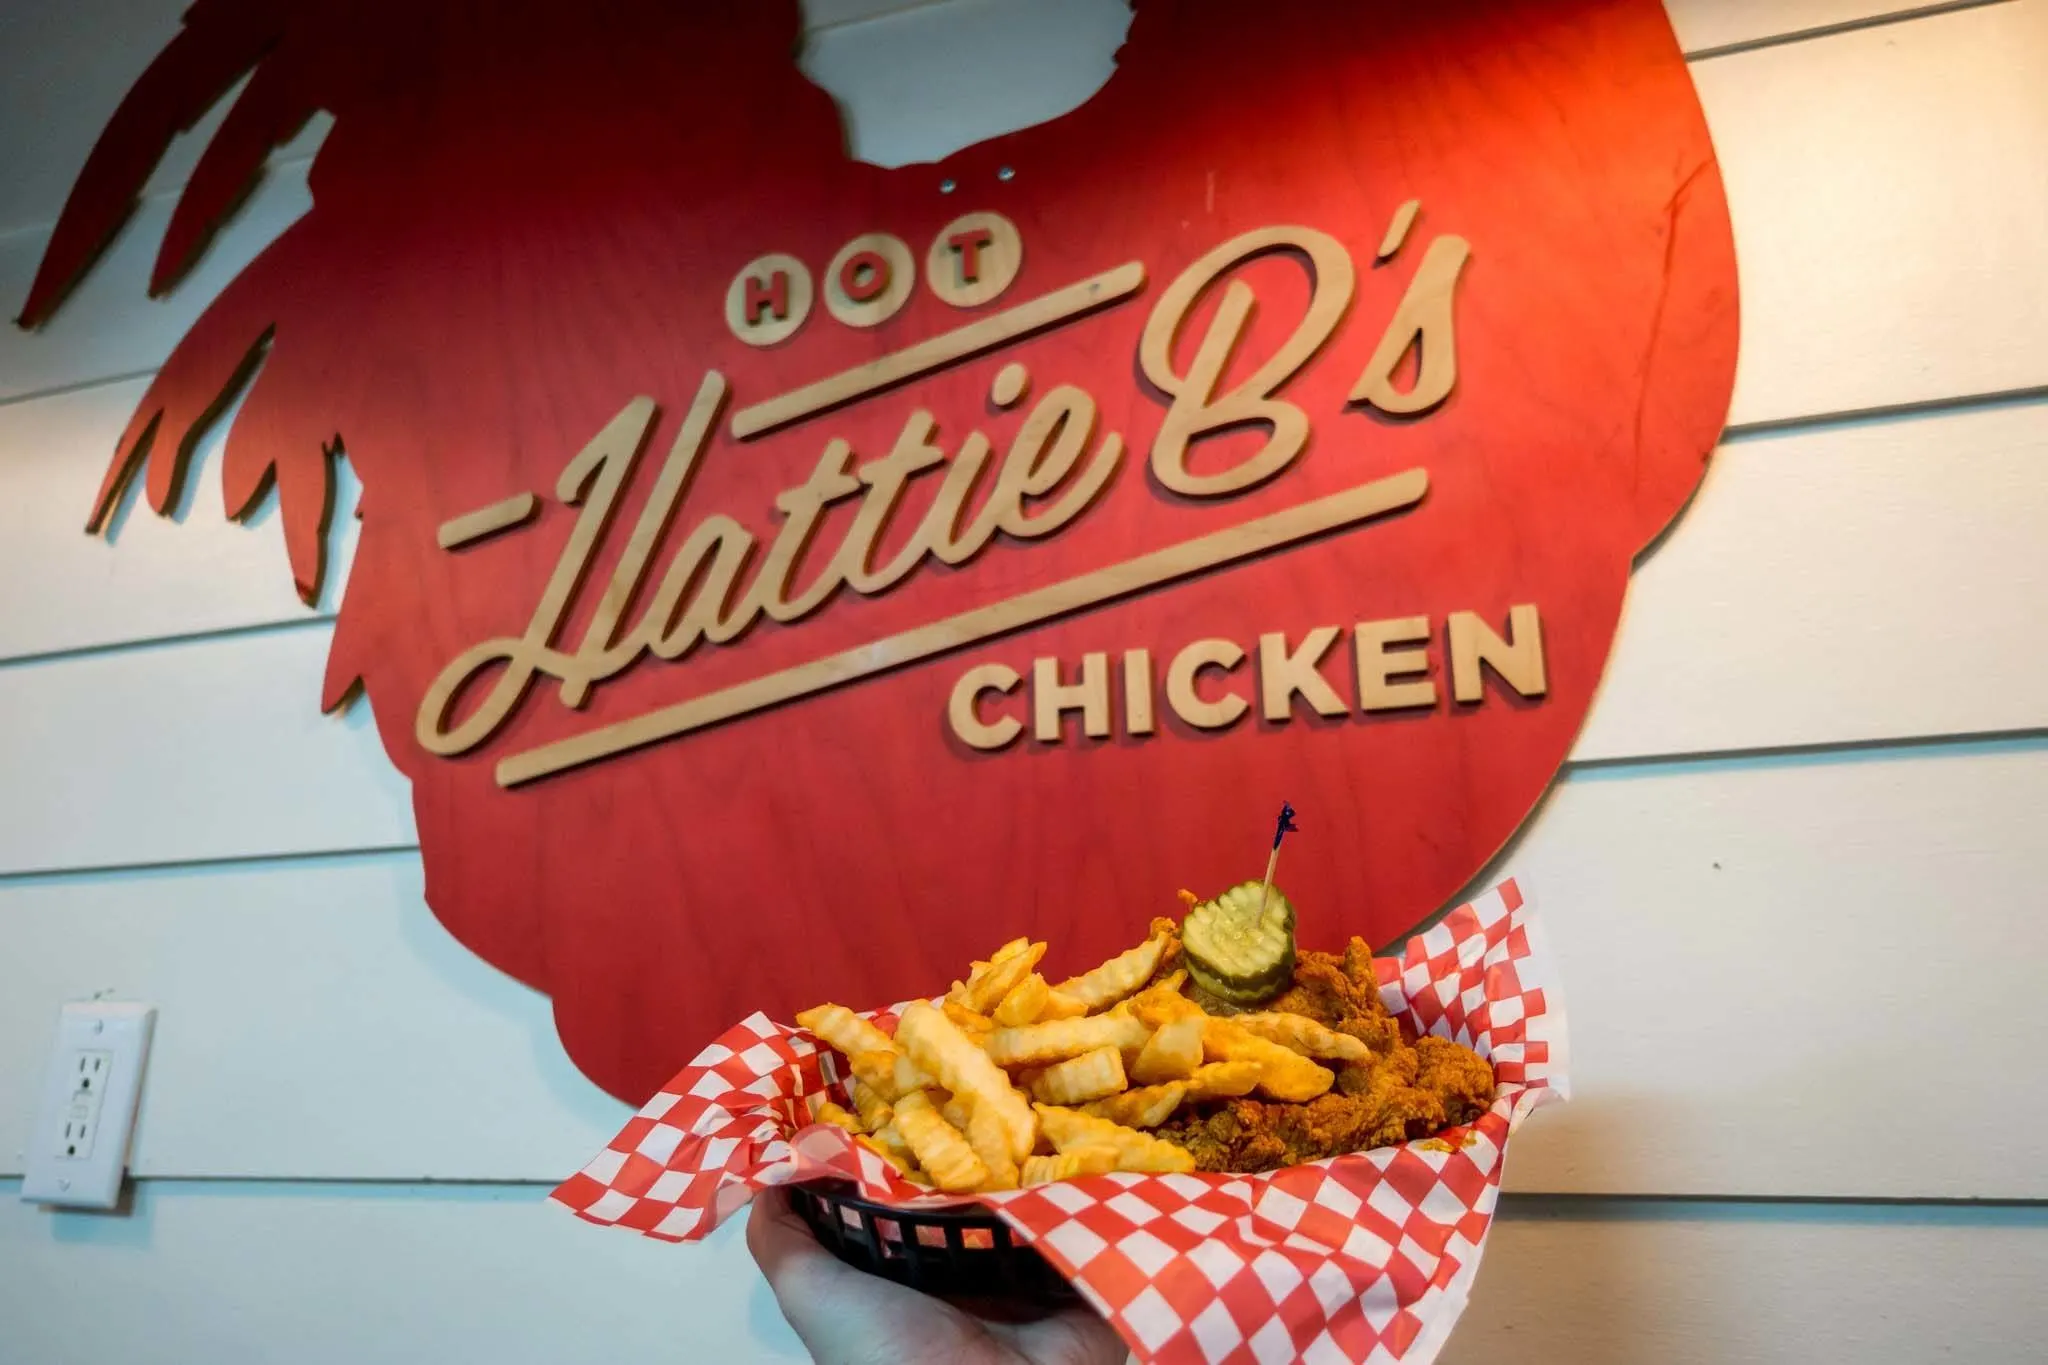 Basket of Nashville hot chicken and French fries in front of a sign for Hattie B's hot chicken